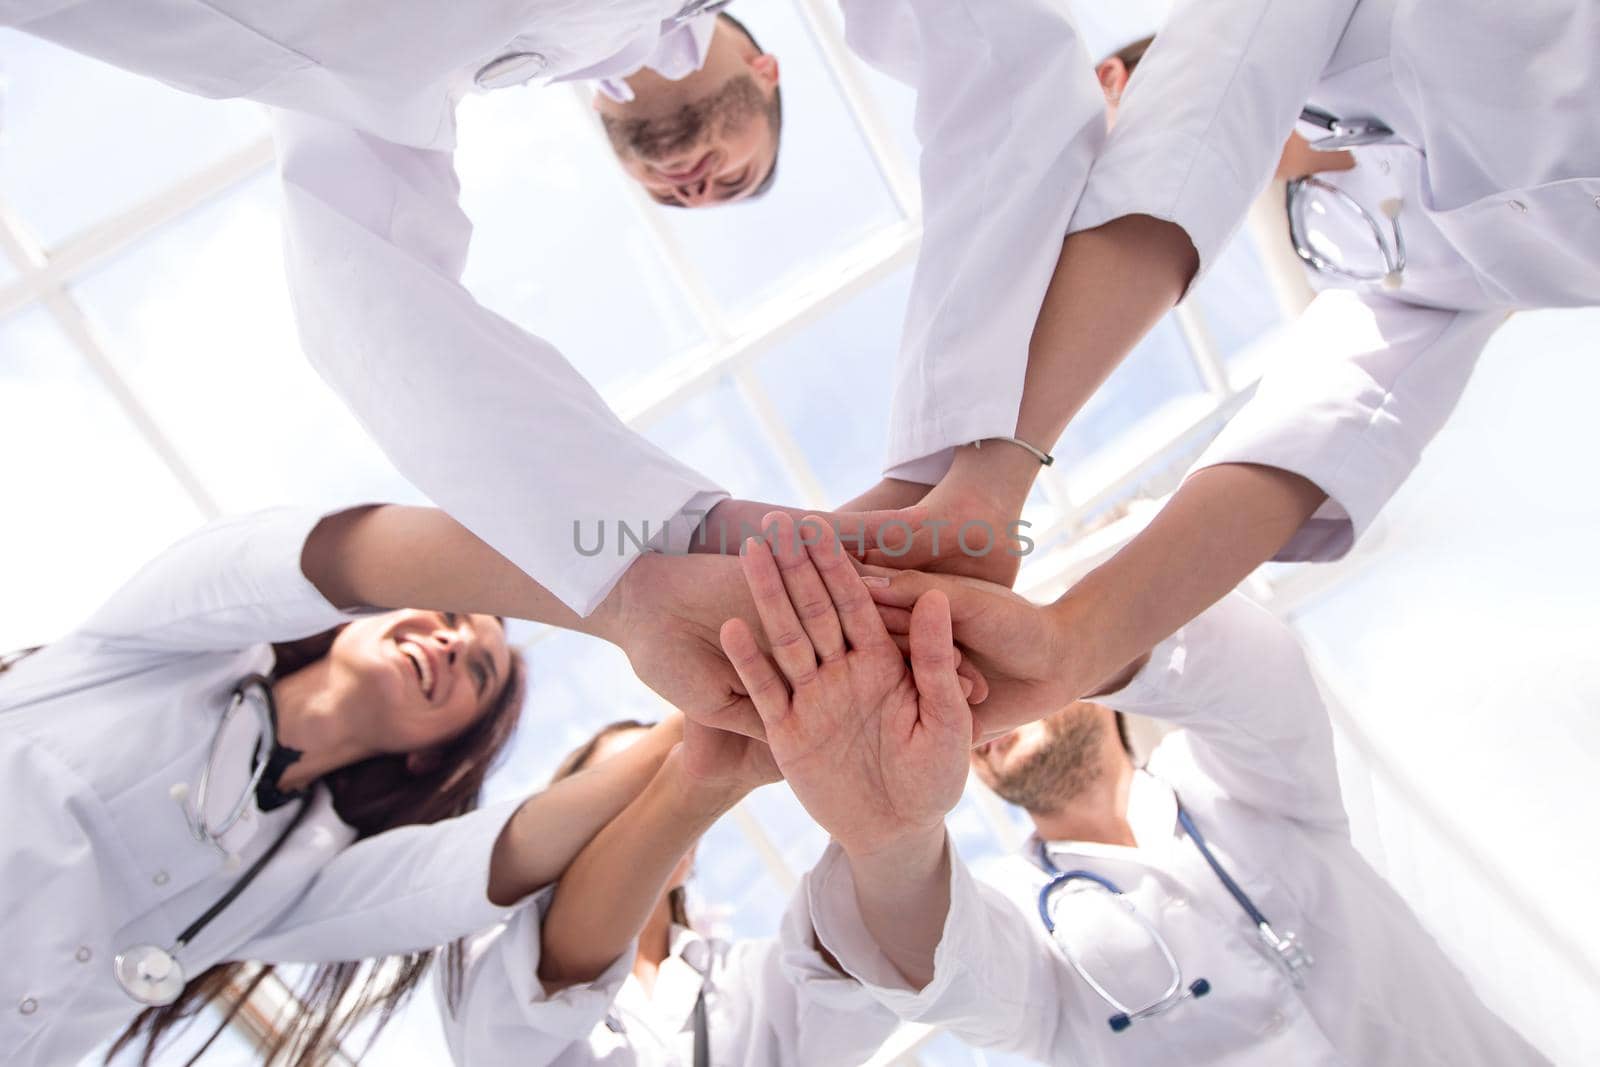 group of diverse medical professionals showing their unity. by asdf